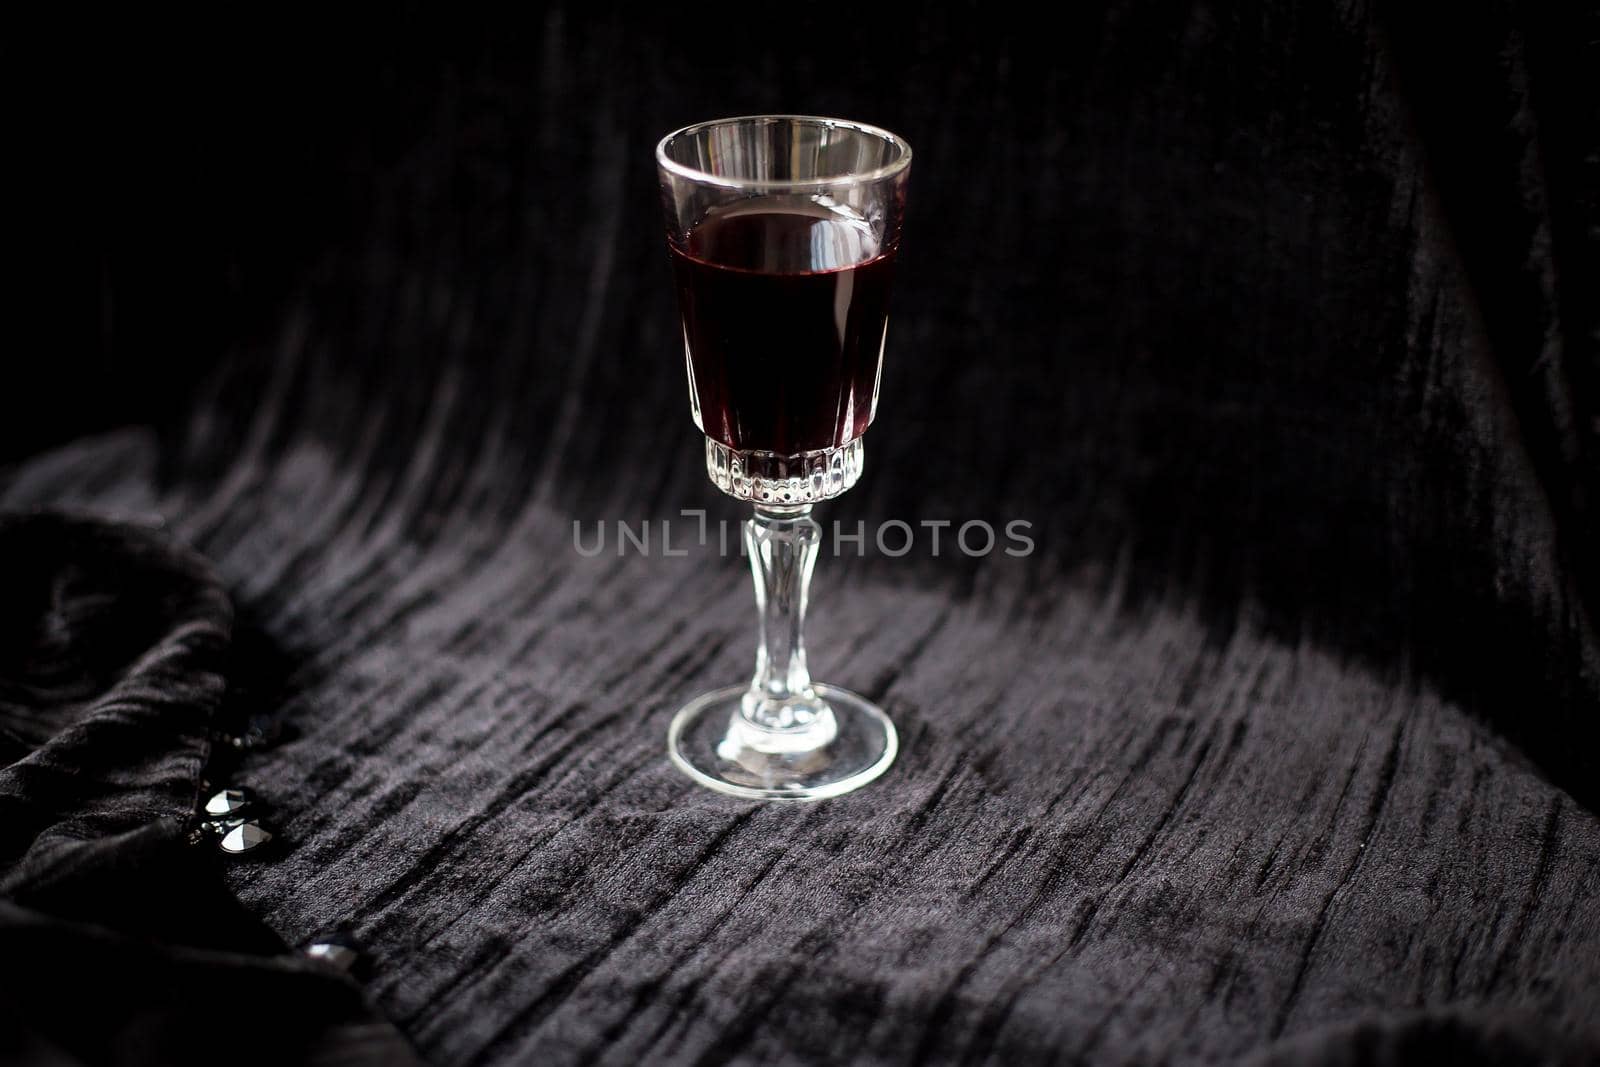 glass of red wine on a black velvet background, close-up by sfinks